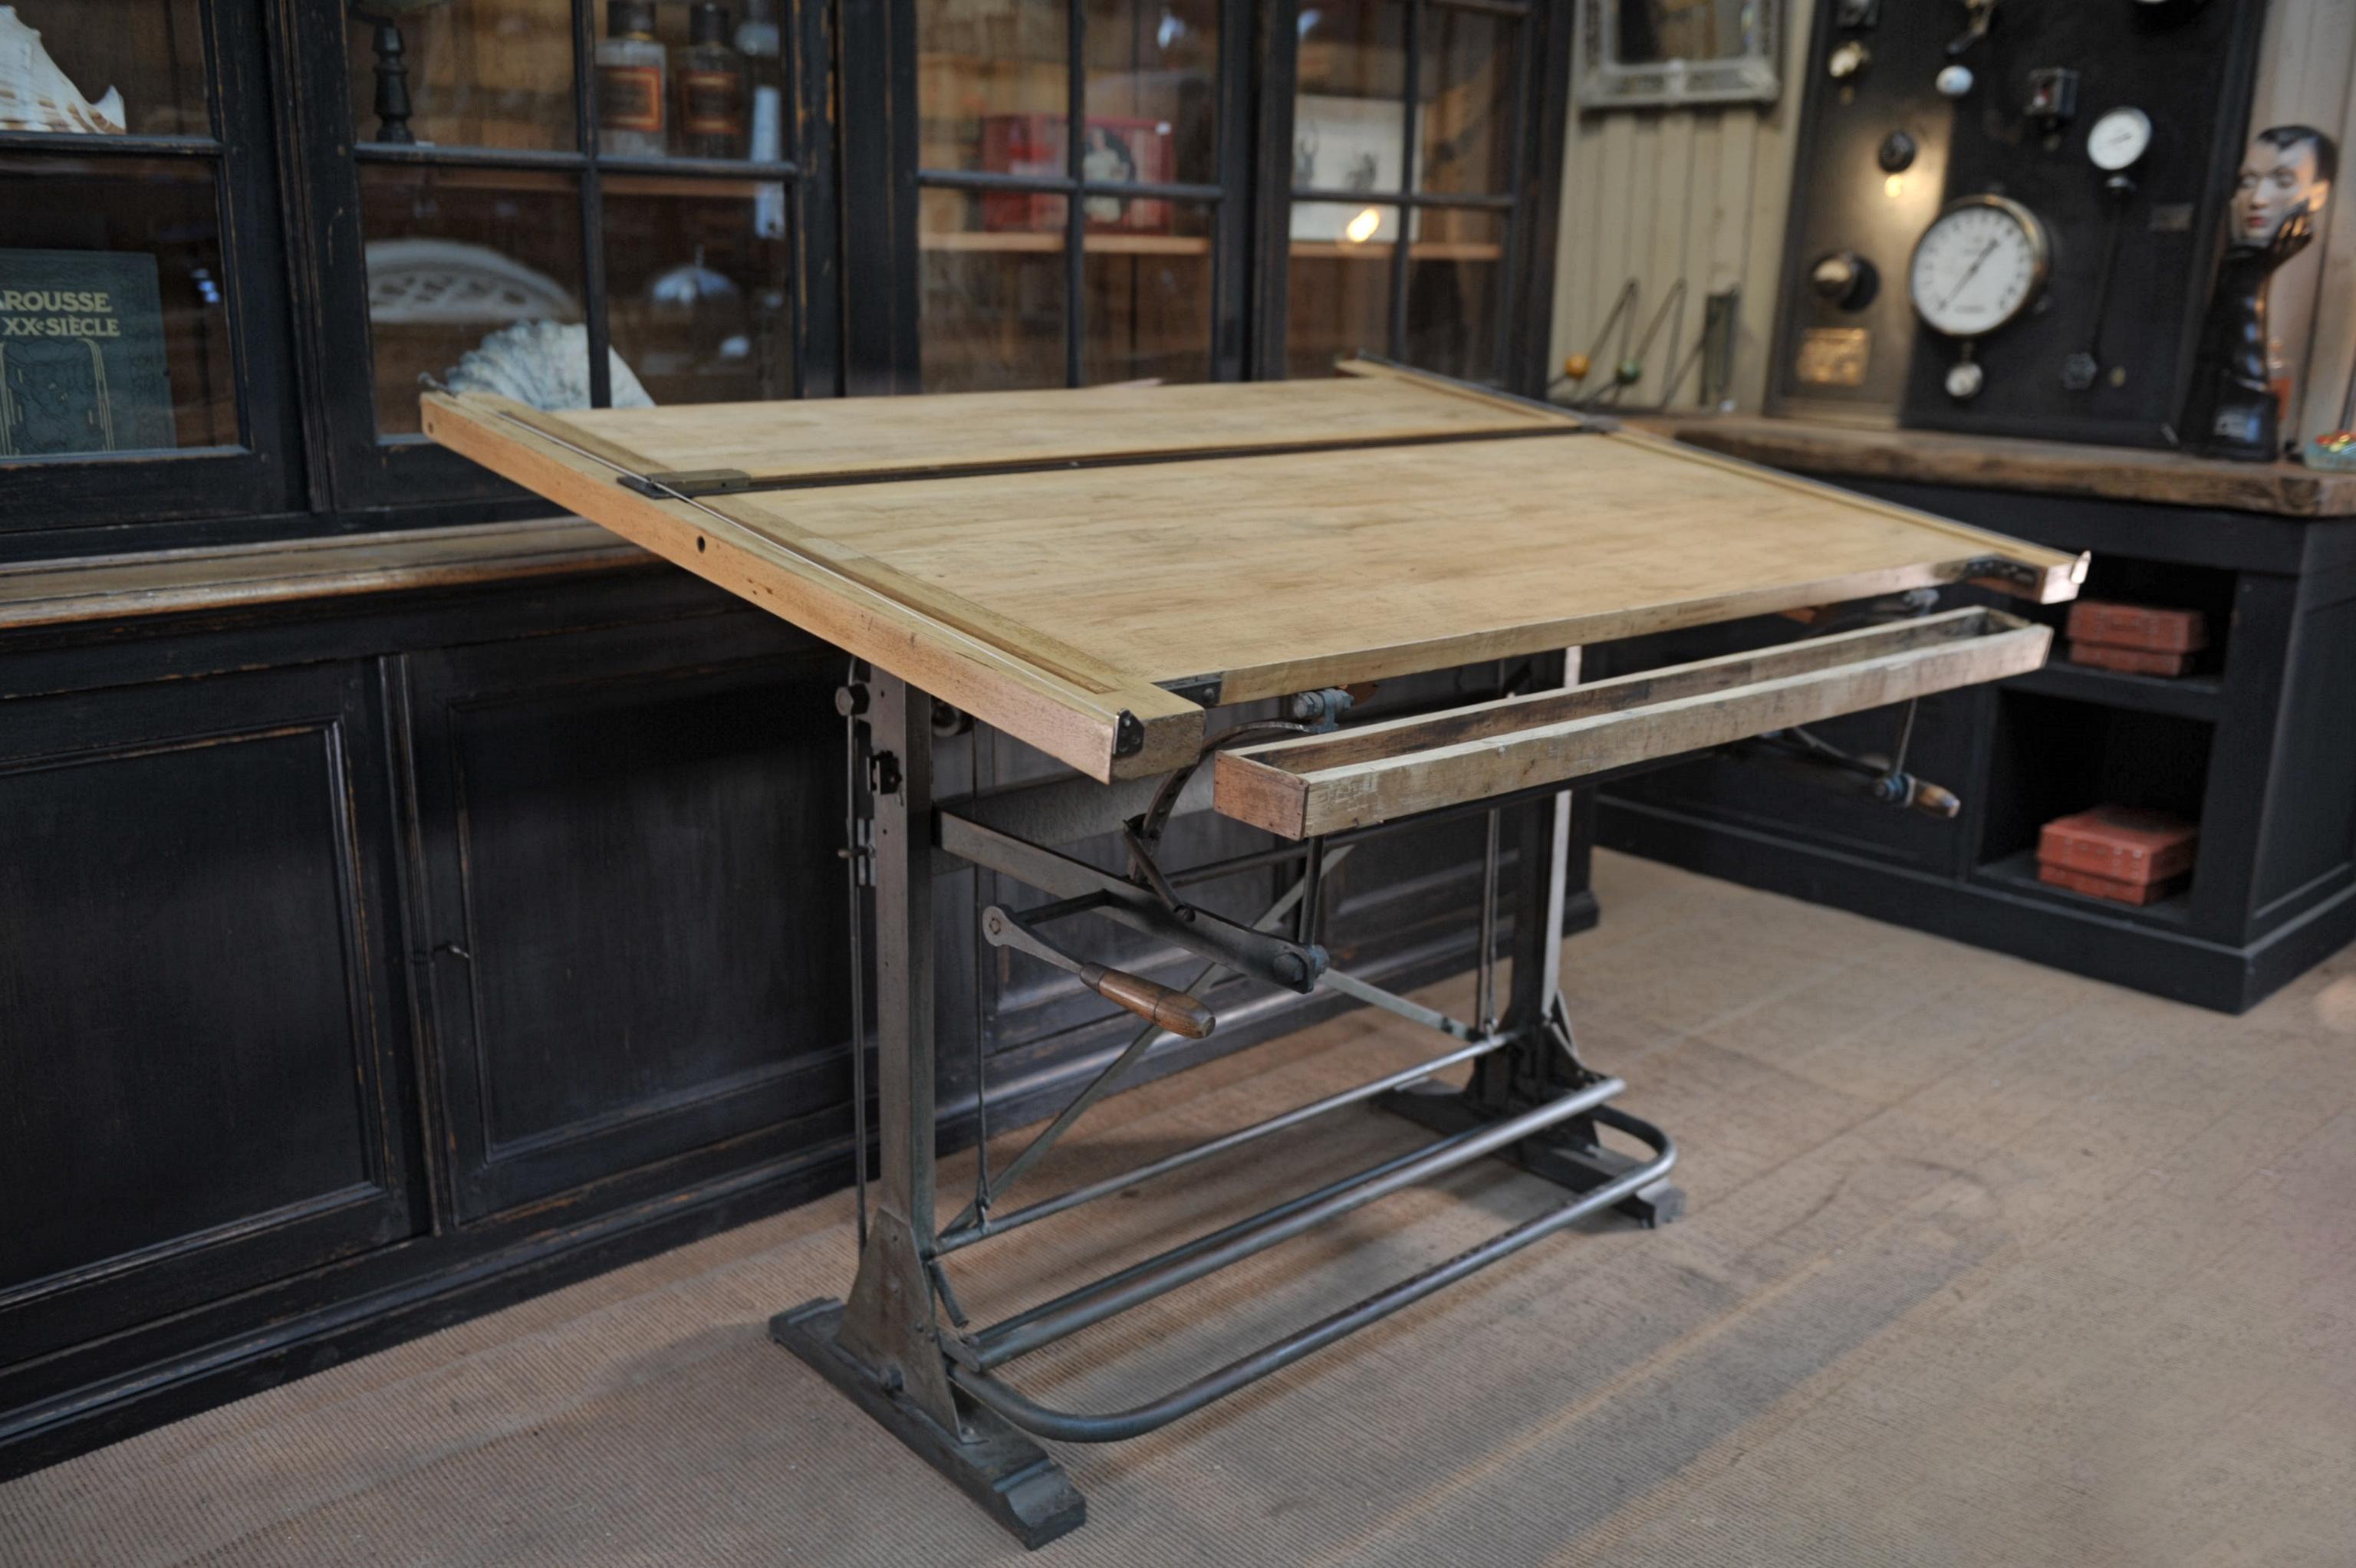 French 1920s Architecte's drafting table, iron structure with original kaki patina, pedal system that locks in one move at exact needed angle and height.
Can also be used as a desk: Width of the top 150 cm 59 inches, height 120 cm 47.24 inches with